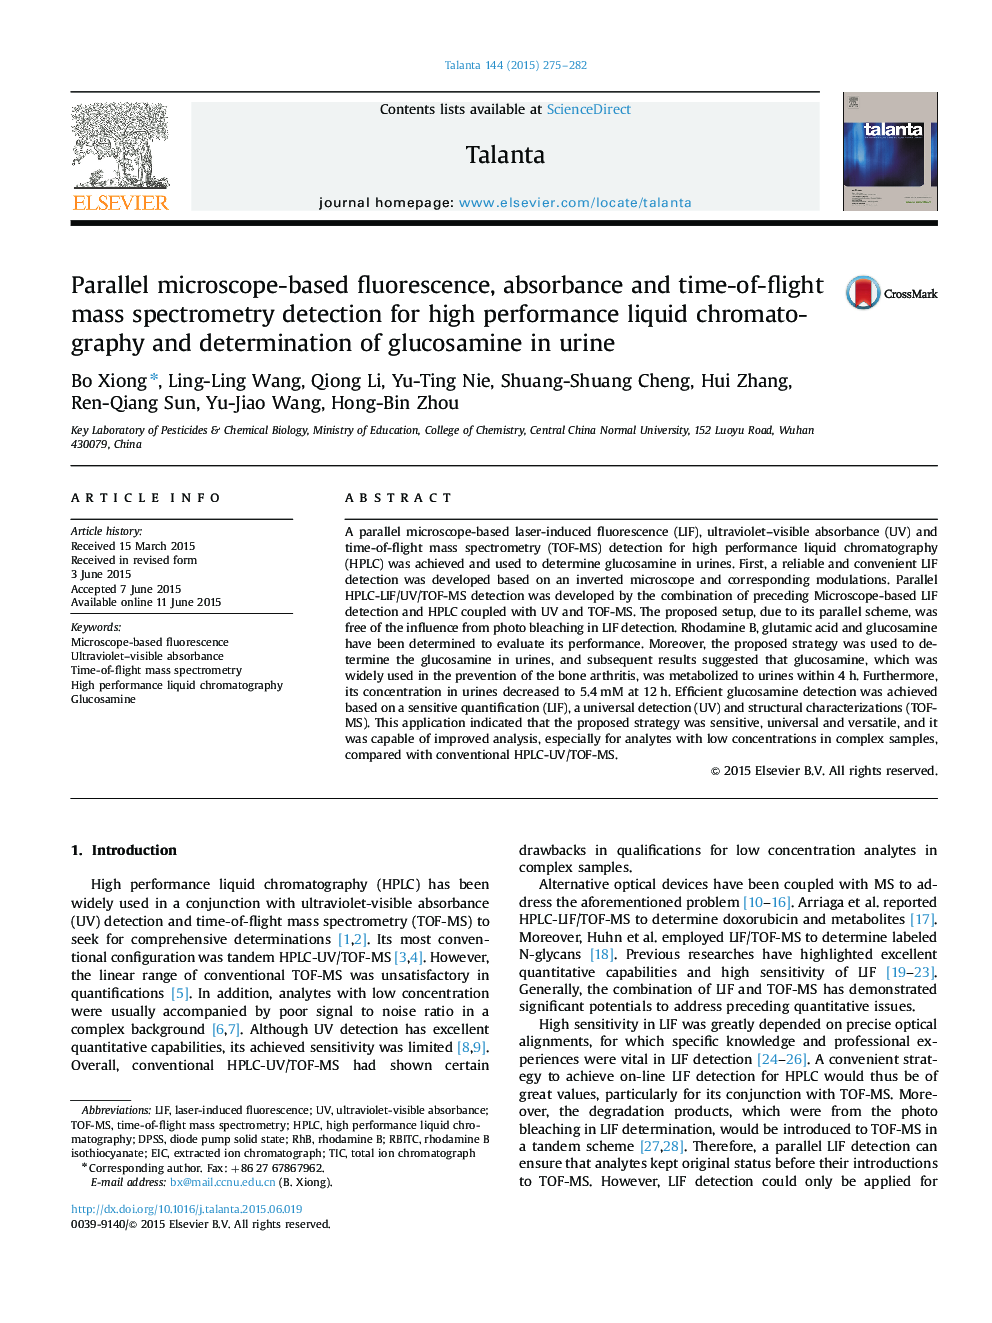 Parallel microscope-based fluorescence, absorbance and time-of-flight mass spectrometry detection for high performance liquid chromatography and determination of glucosamine in urine